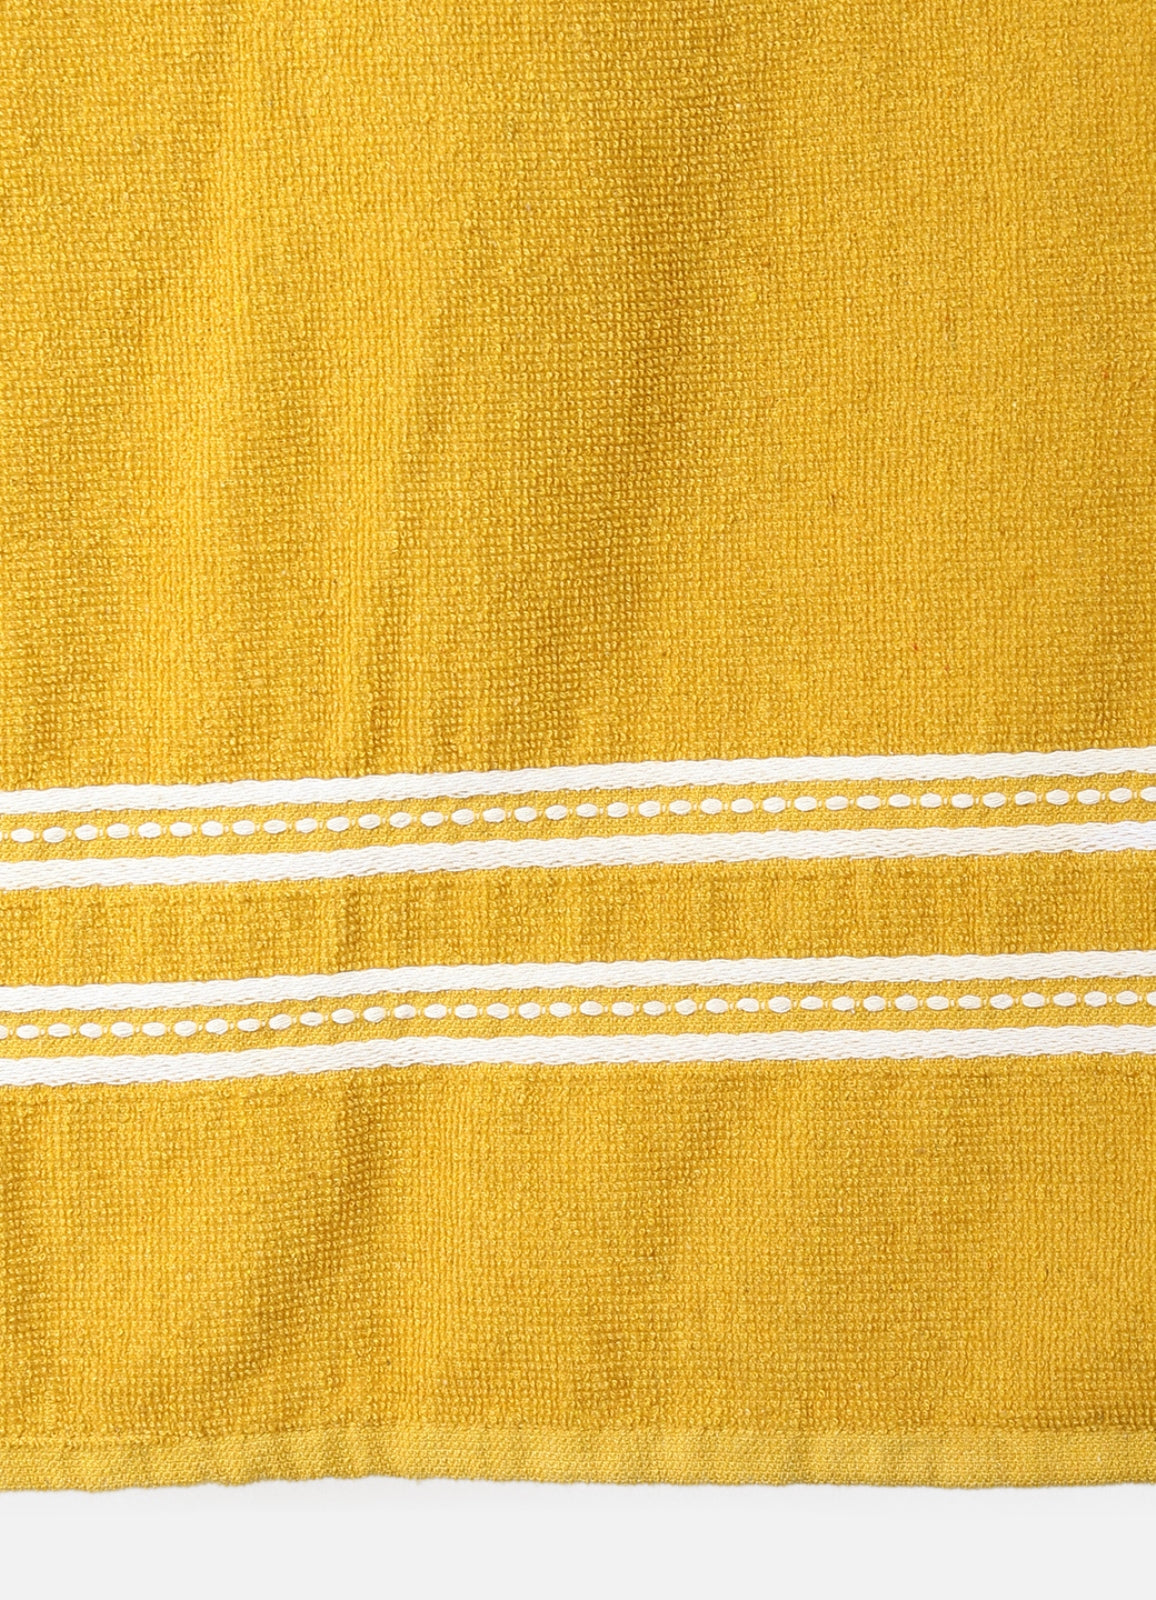 Set of 2 Yellow Solid Cotton Towels